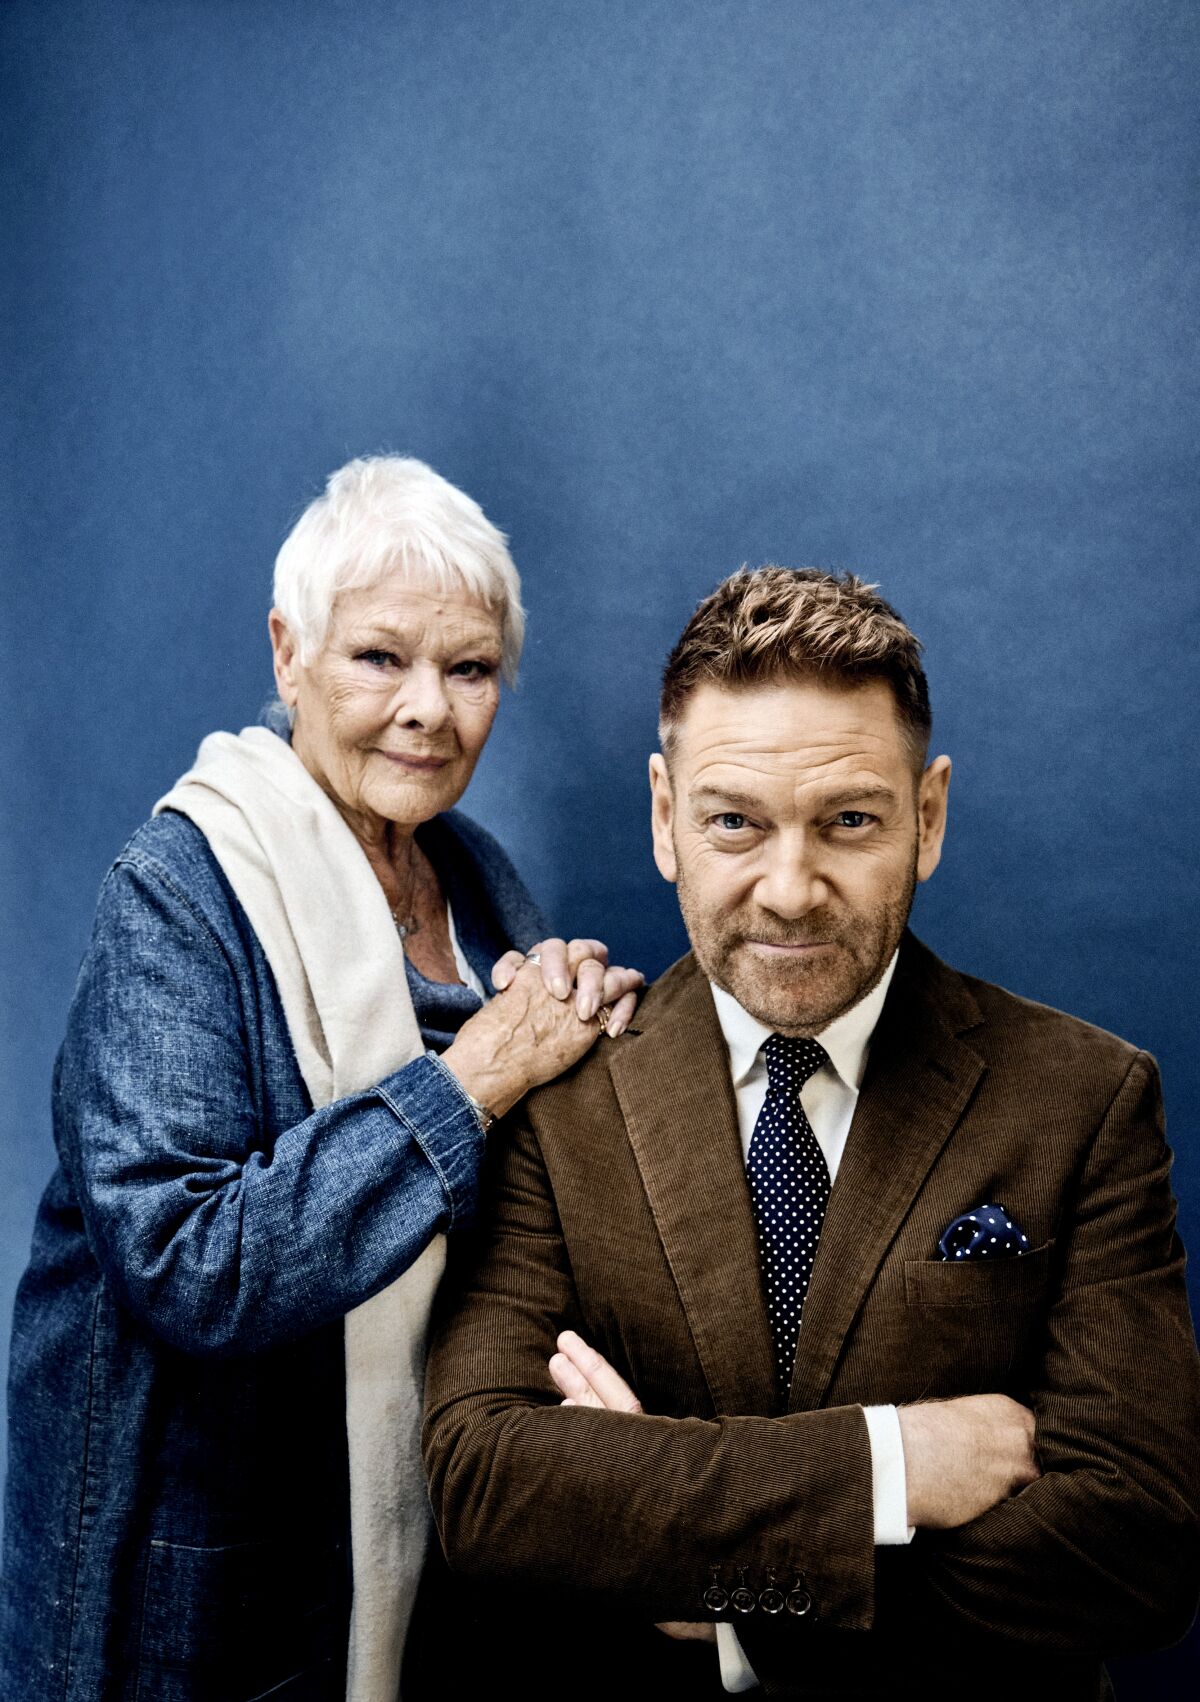 Judi Dench leans in with her hands on Kenneth Branagh's shoulders.